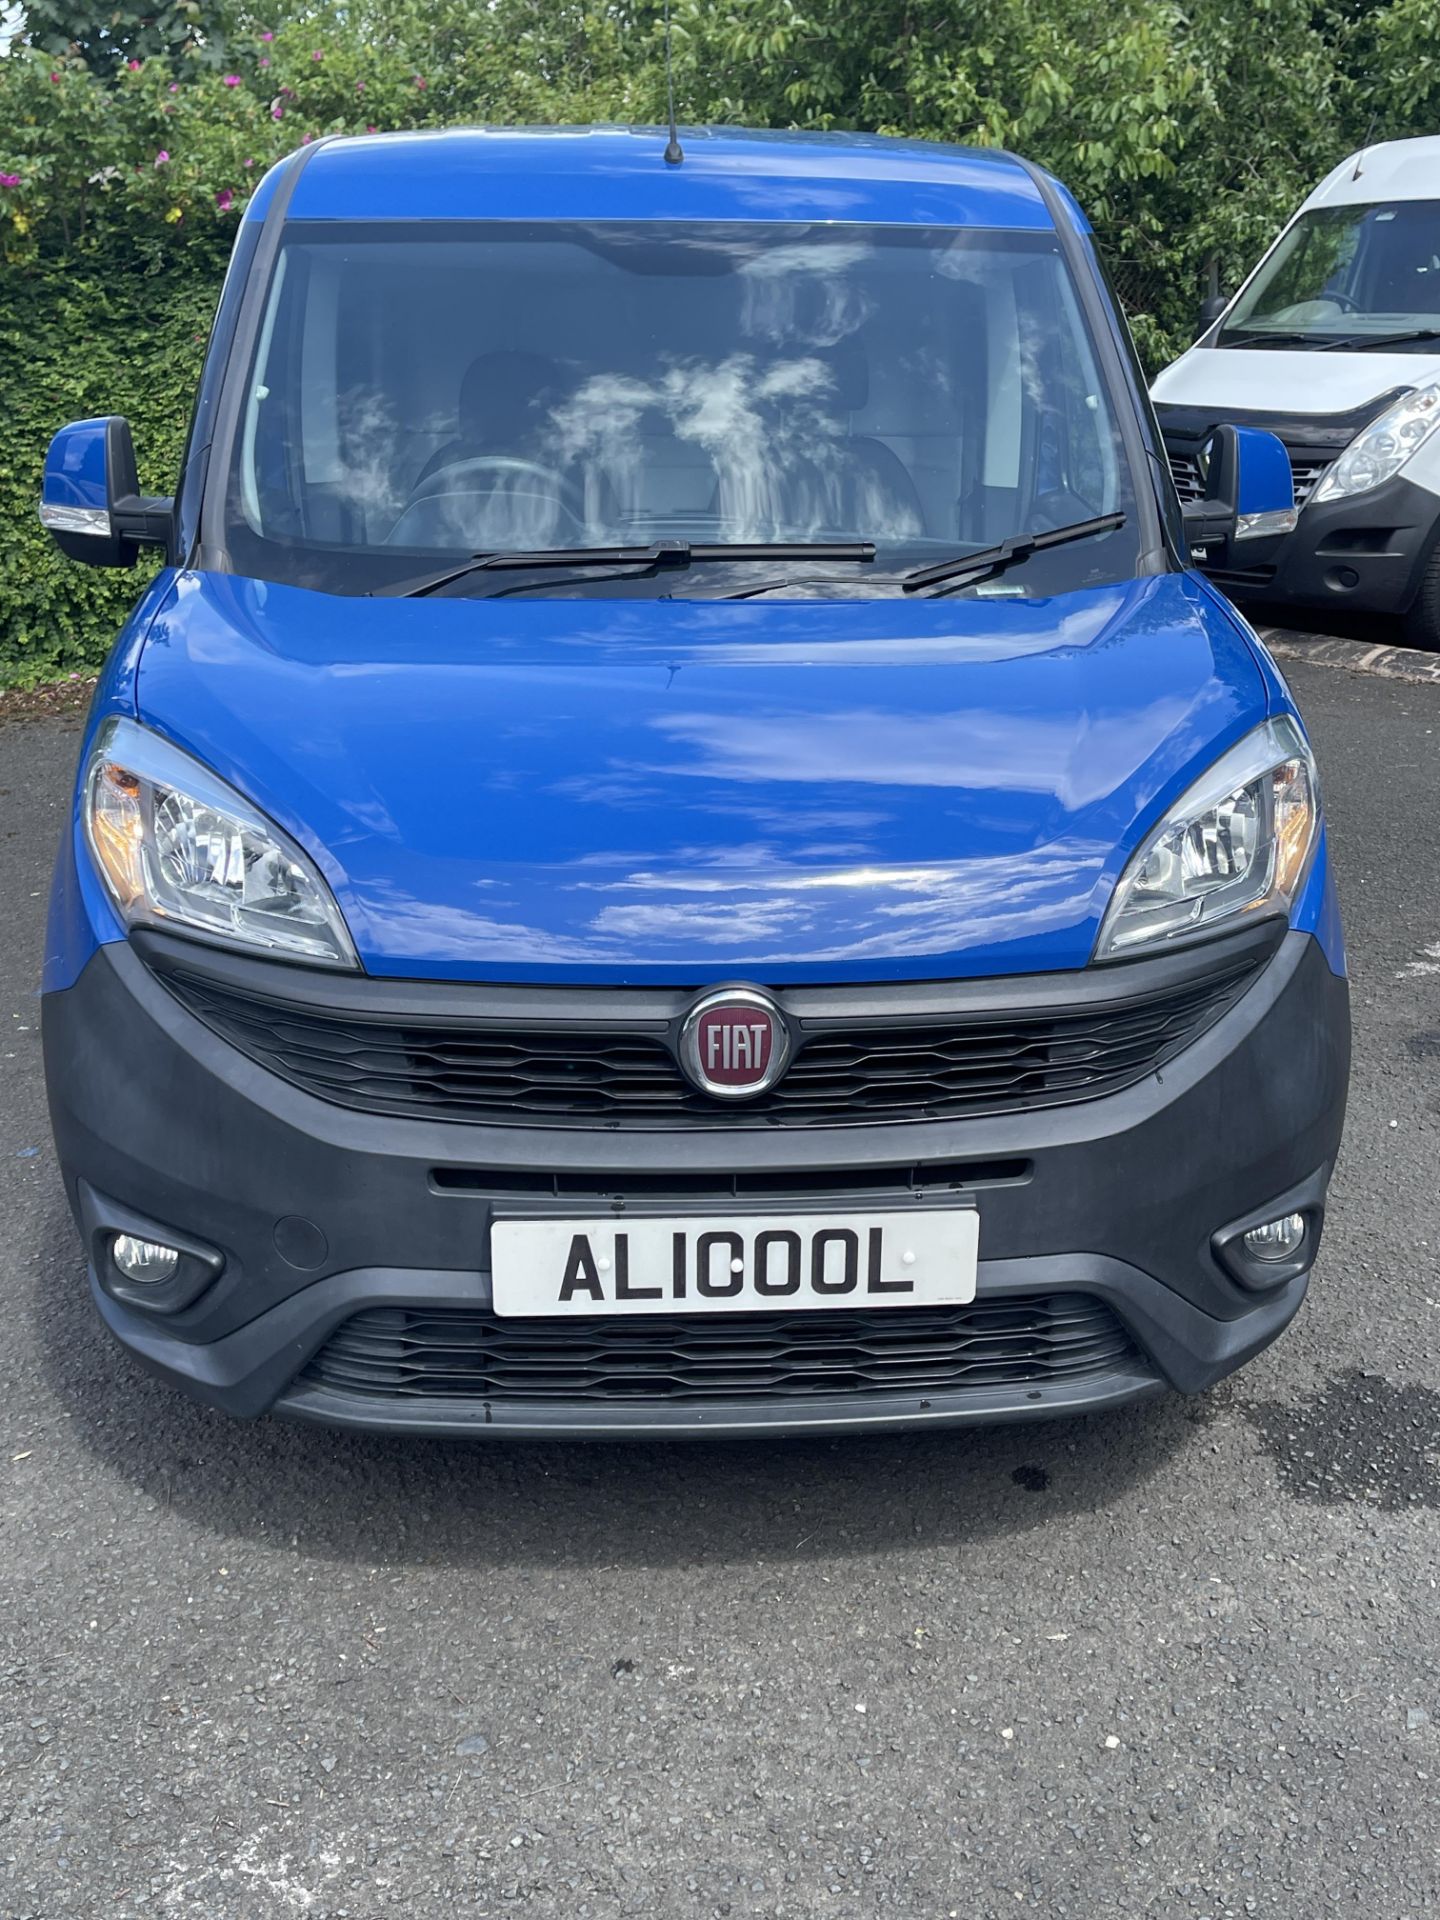 2016 - Fiat Doblo SX Mulijet 1,248cc Diesel Panel Van - High Level of Factory Options and Low Miles - Image 12 of 59